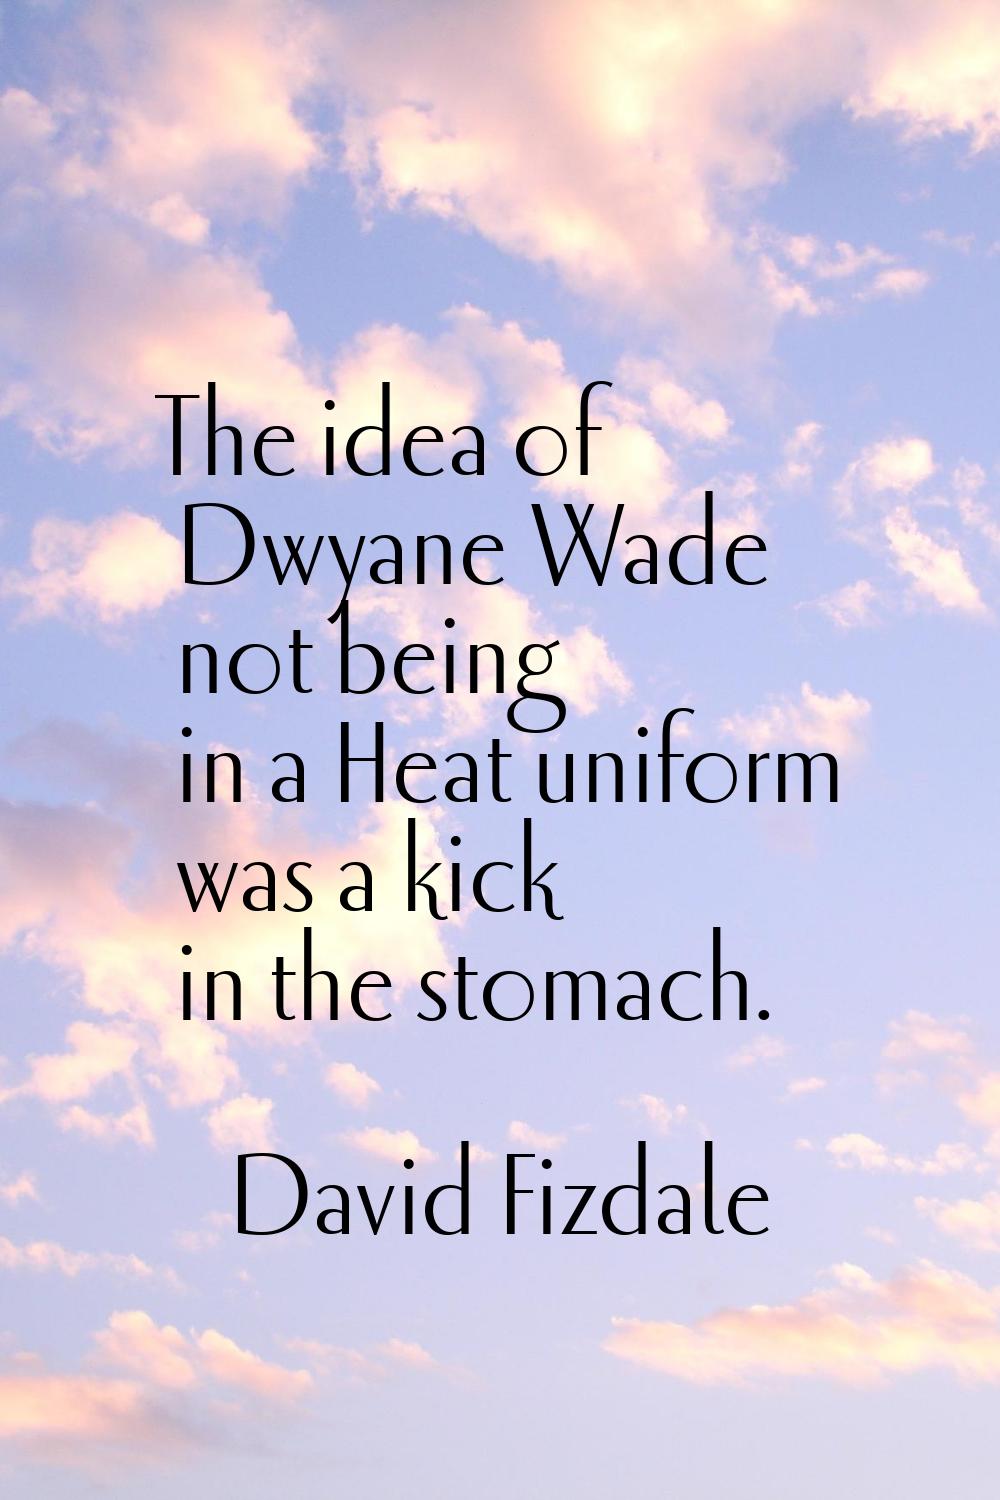 The idea of Dwyane Wade not being in a Heat uniform was a kick in the stomach.